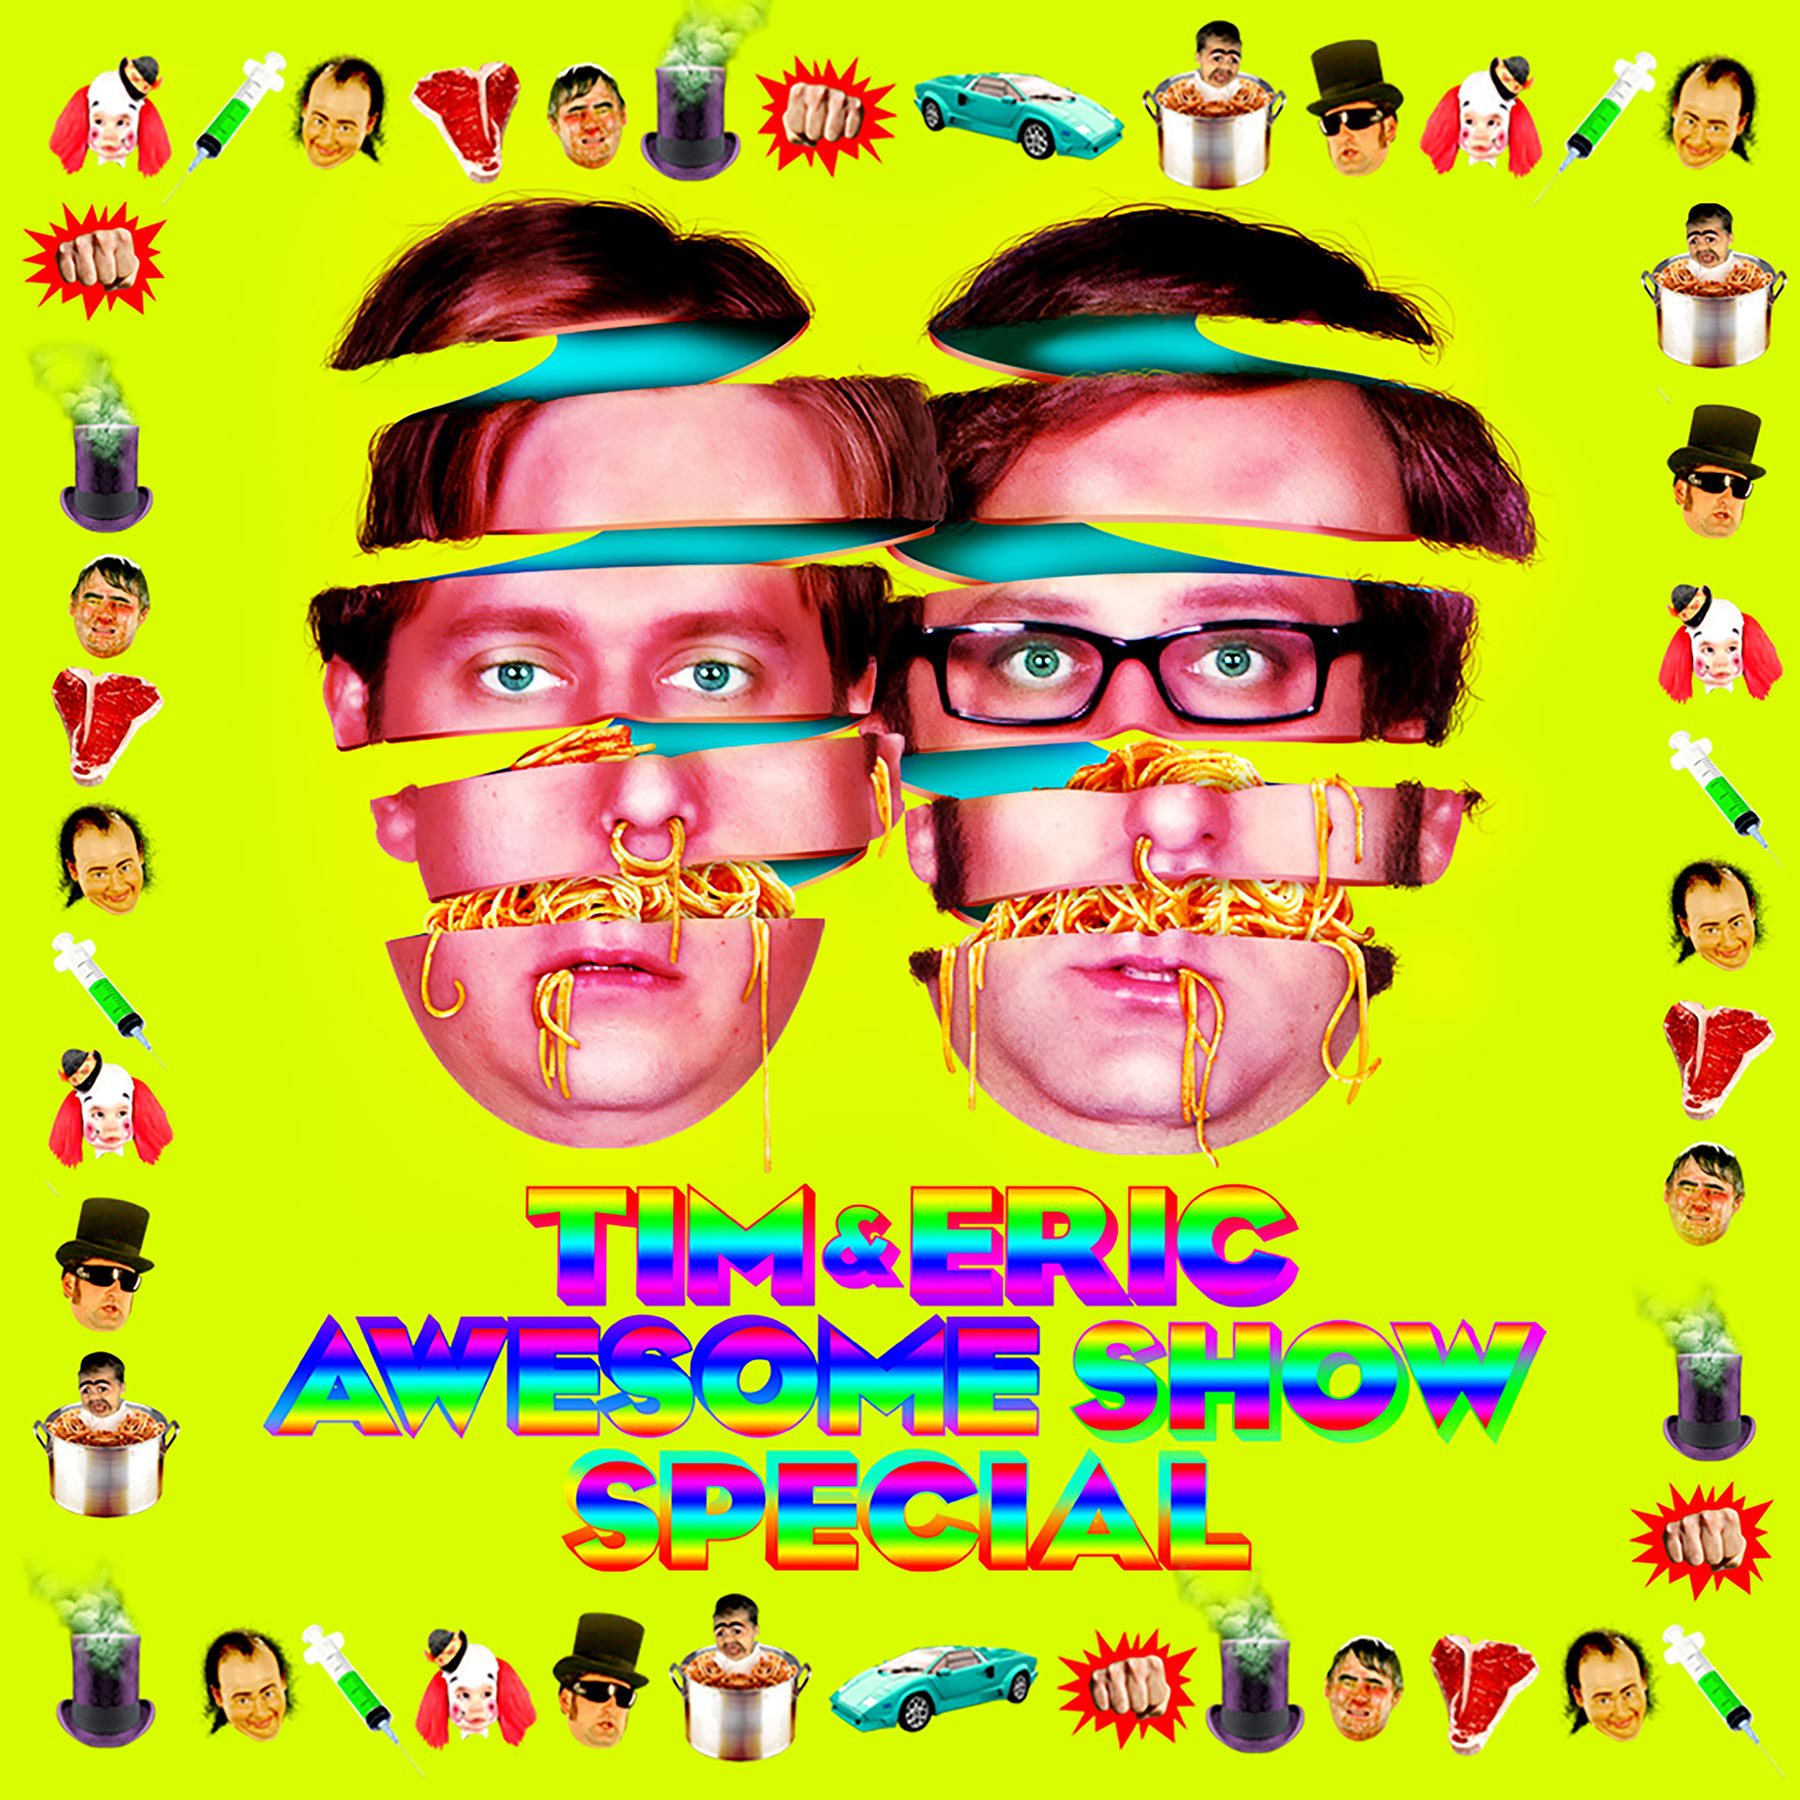 A <i></noscript>Tim and Eric Awesome Show, Great Job!</i> 10th Anniversary Special Is Coming to Adult Swim” title=”teasr_image2-1502393128″ data-original-id=”253114″ data-adjusted-id=”253114″ class=”sm_size_full_width sm_alignment_center ” data-image-source=”video_screenshot” />
<div class=